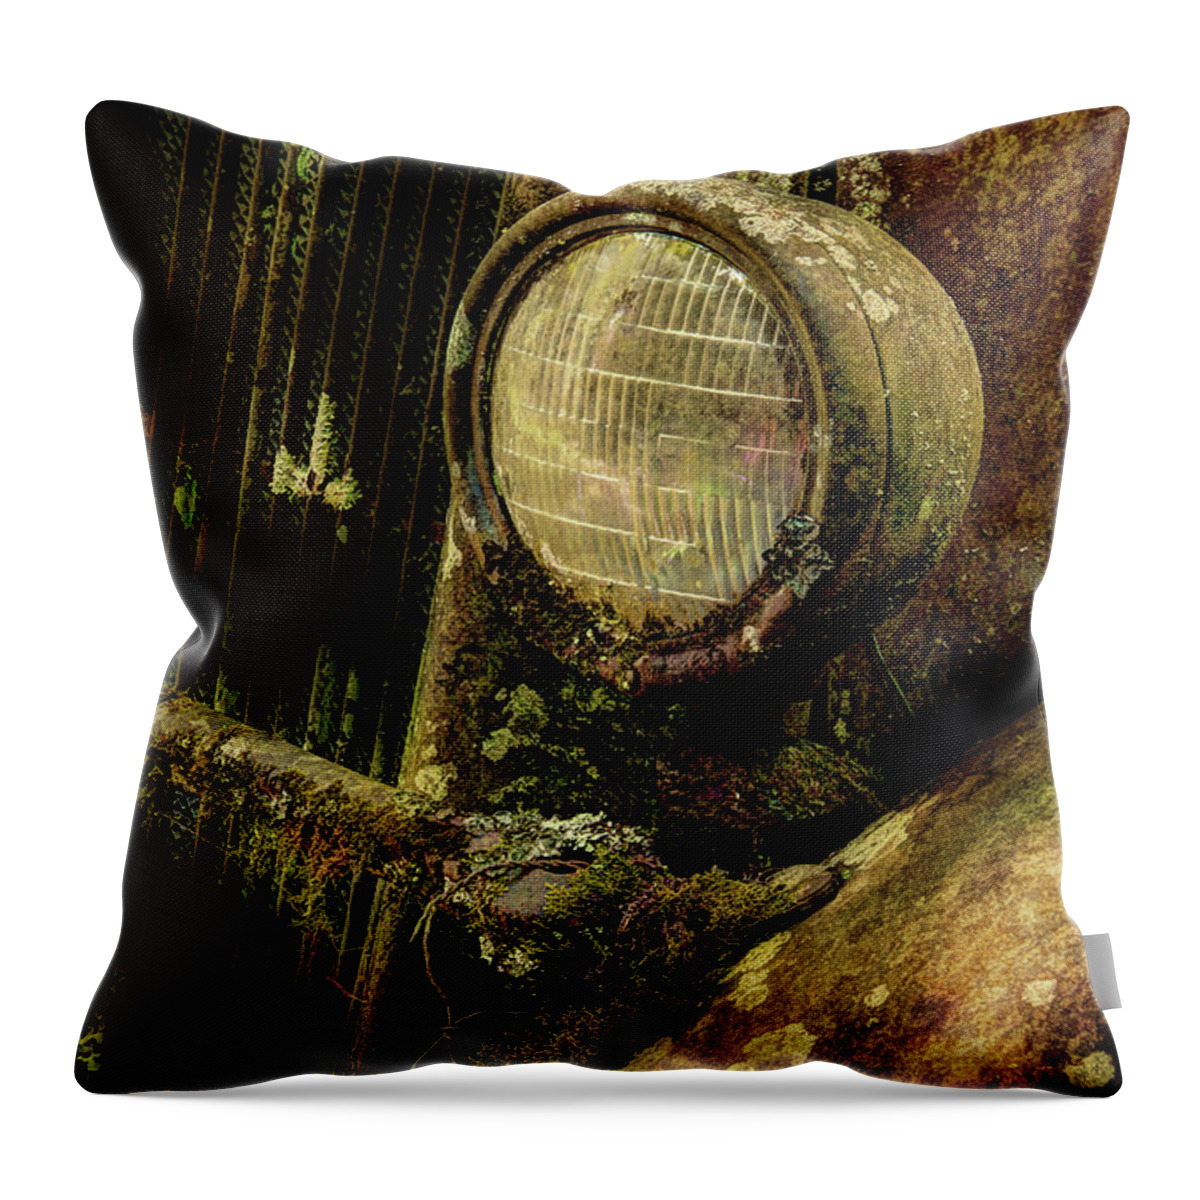 Antique Truck Throw Pillow featuring the photograph This Old Truck by Mike Eingle